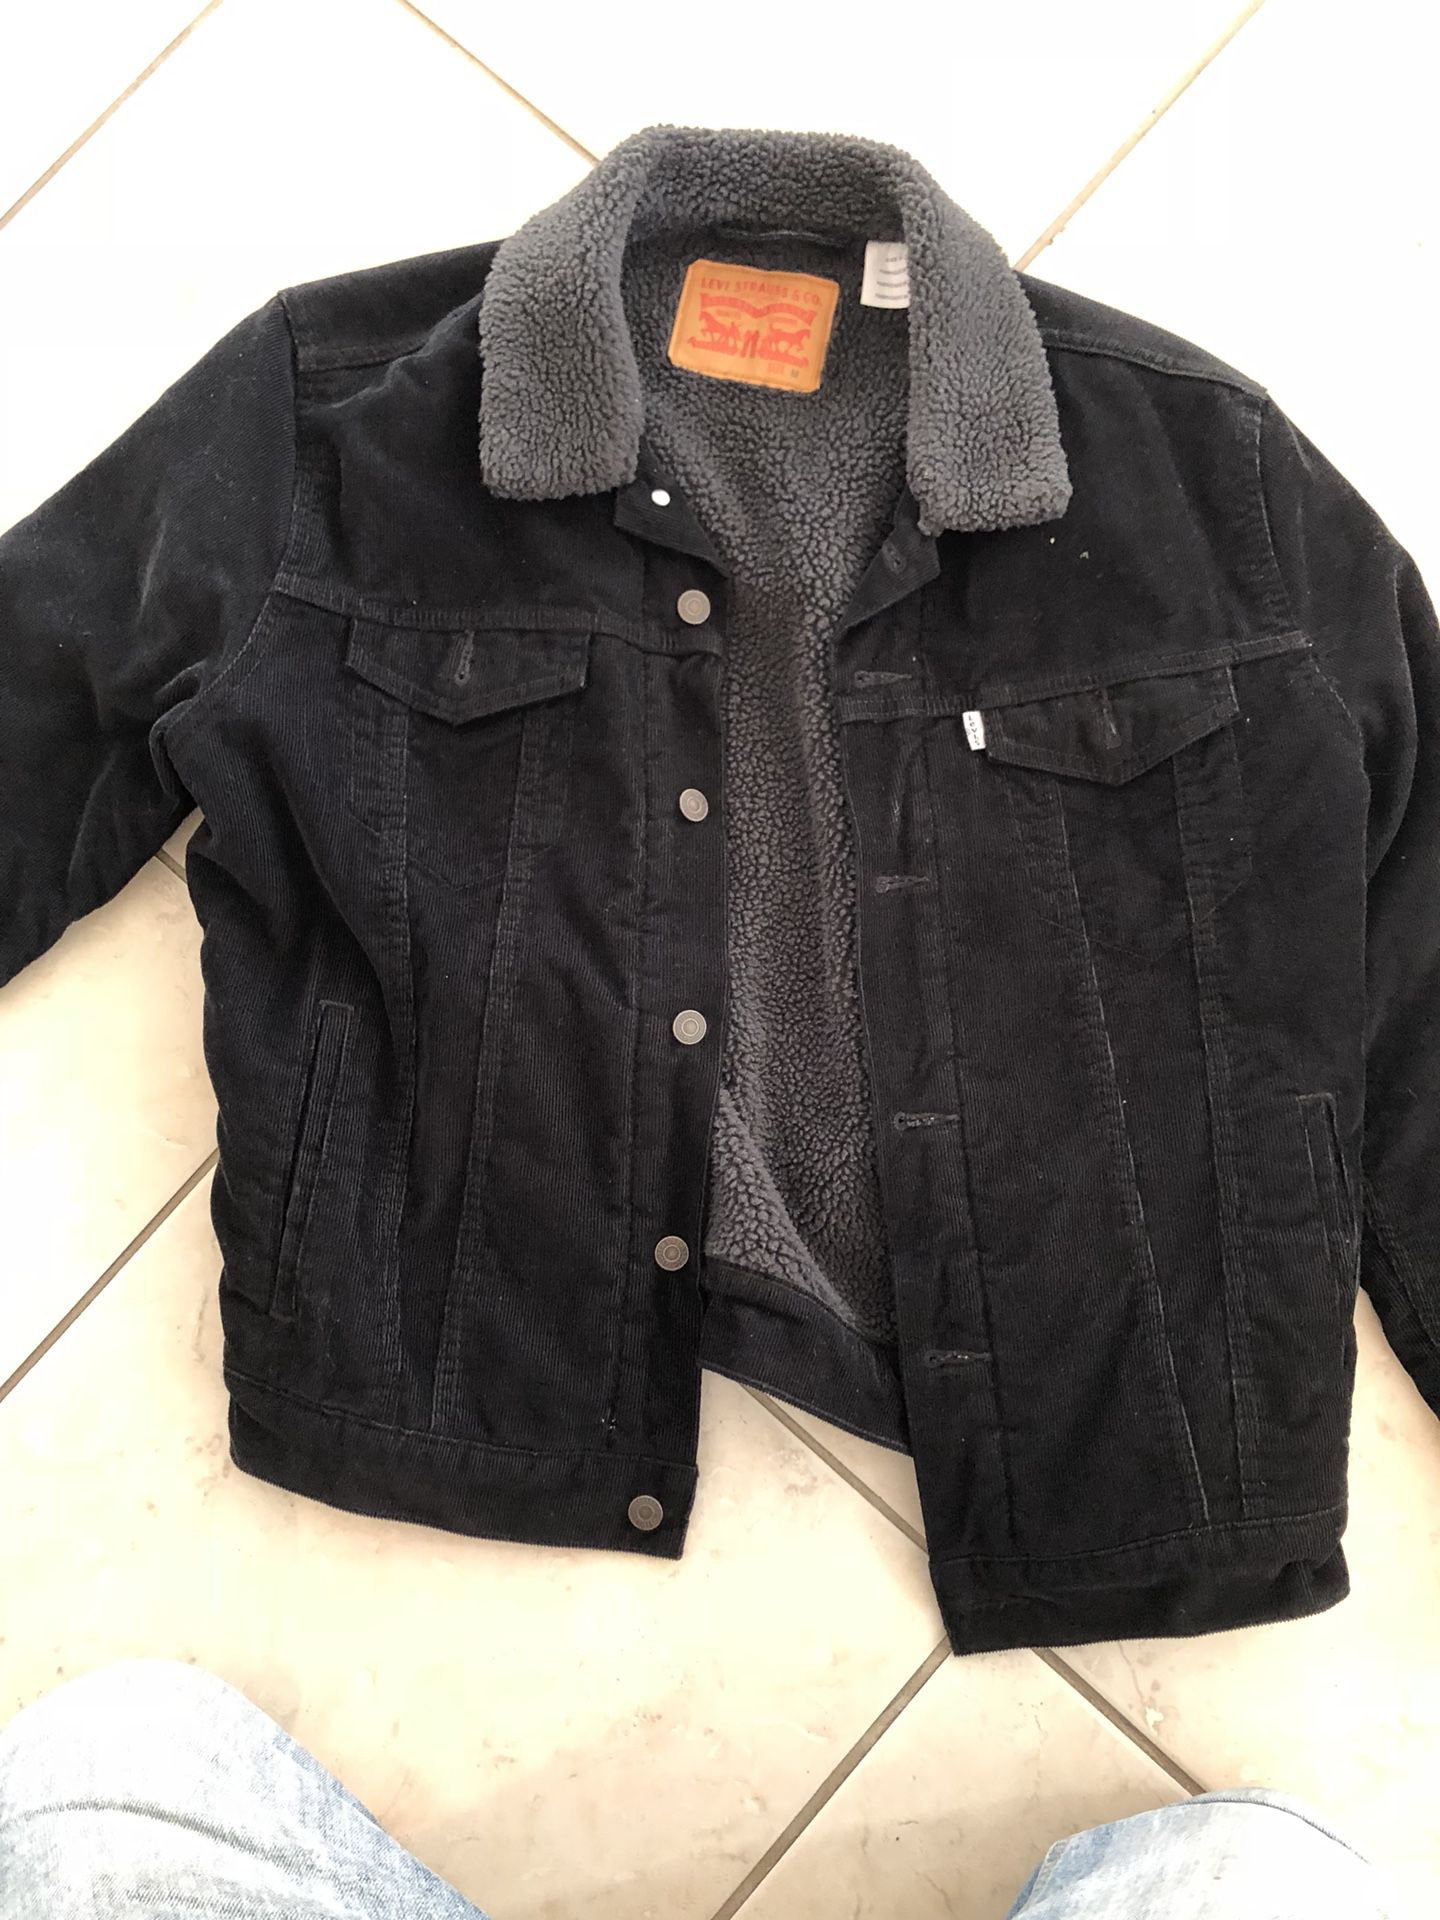 Levi’s Sherpa trucker jacket M for Sale in Hollywood, FL - OfferUp